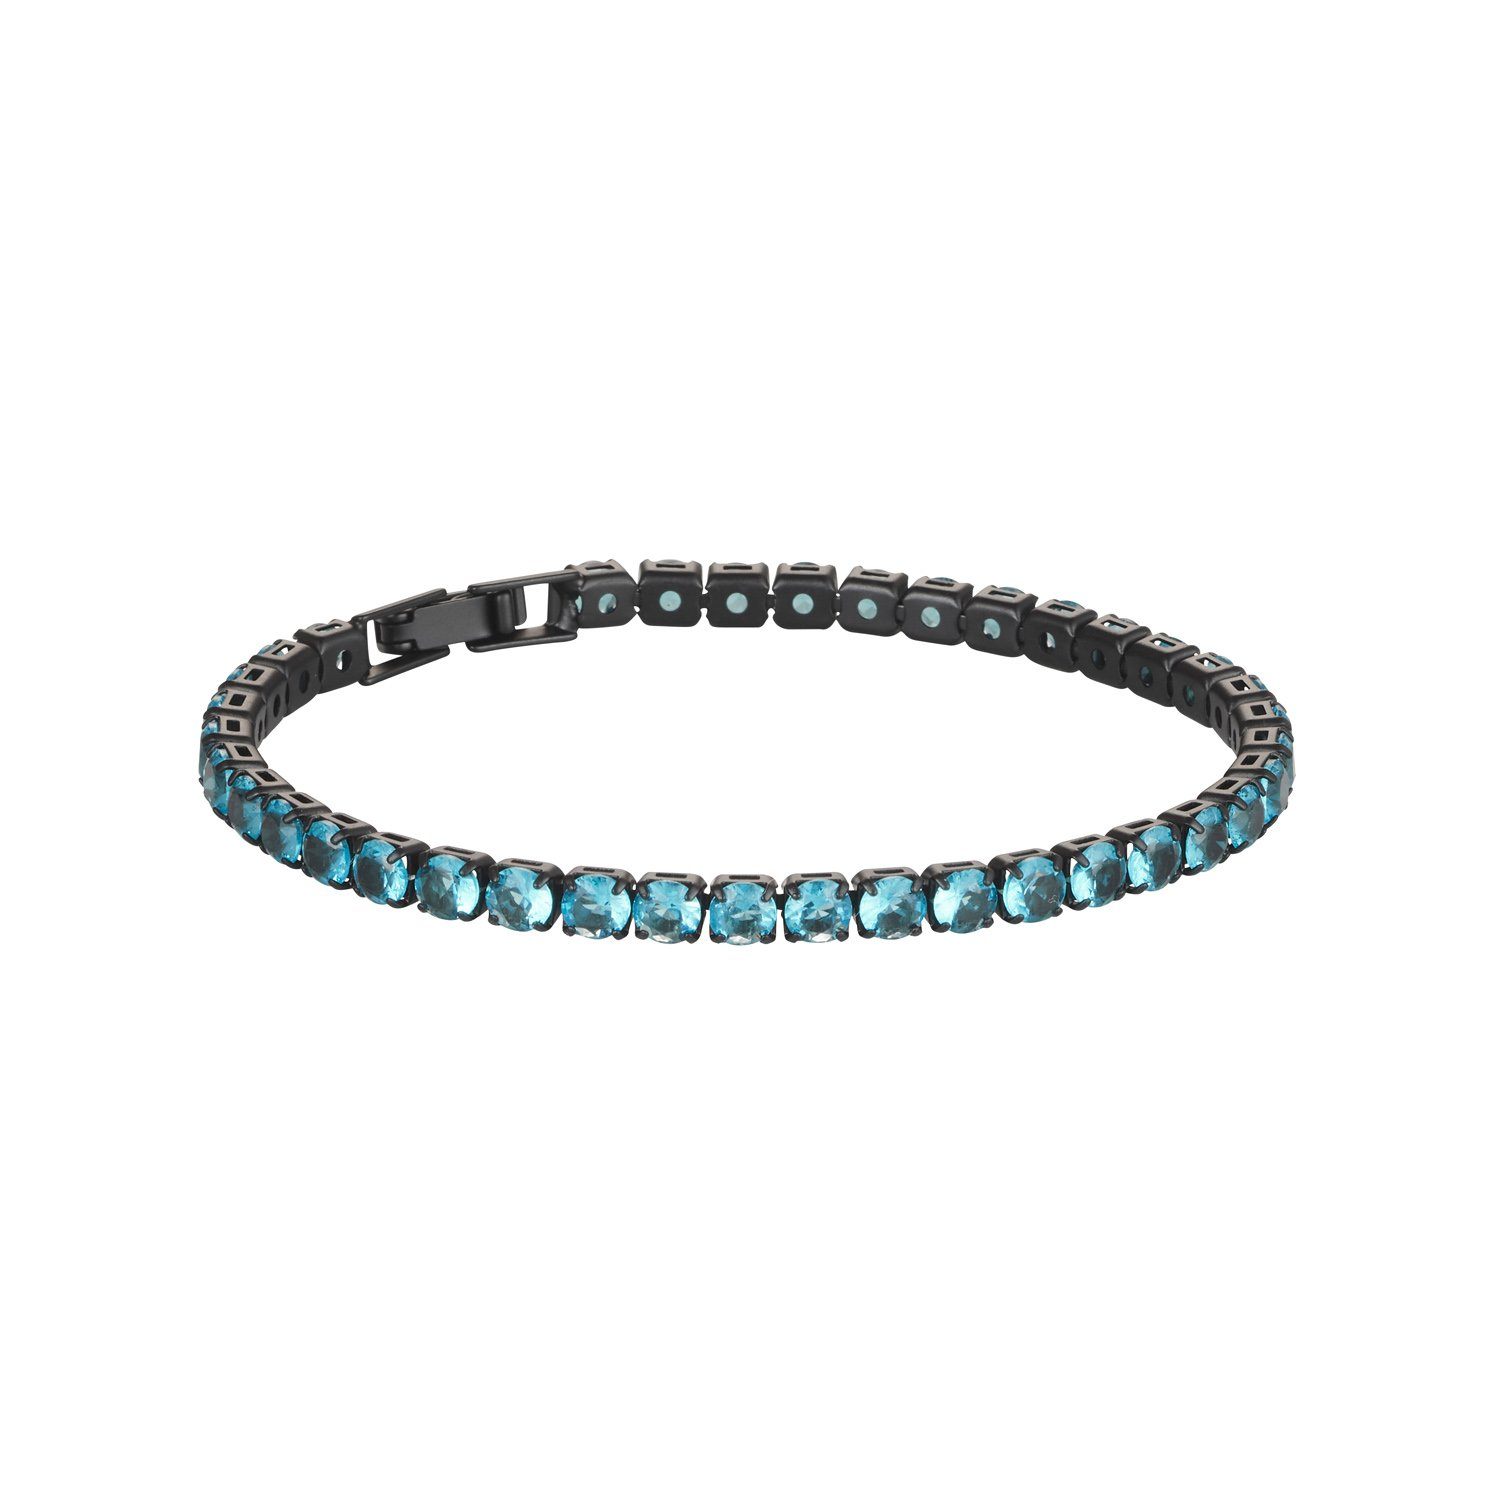 Product photo of tennis bracelet with black hardware and blue diamante stones